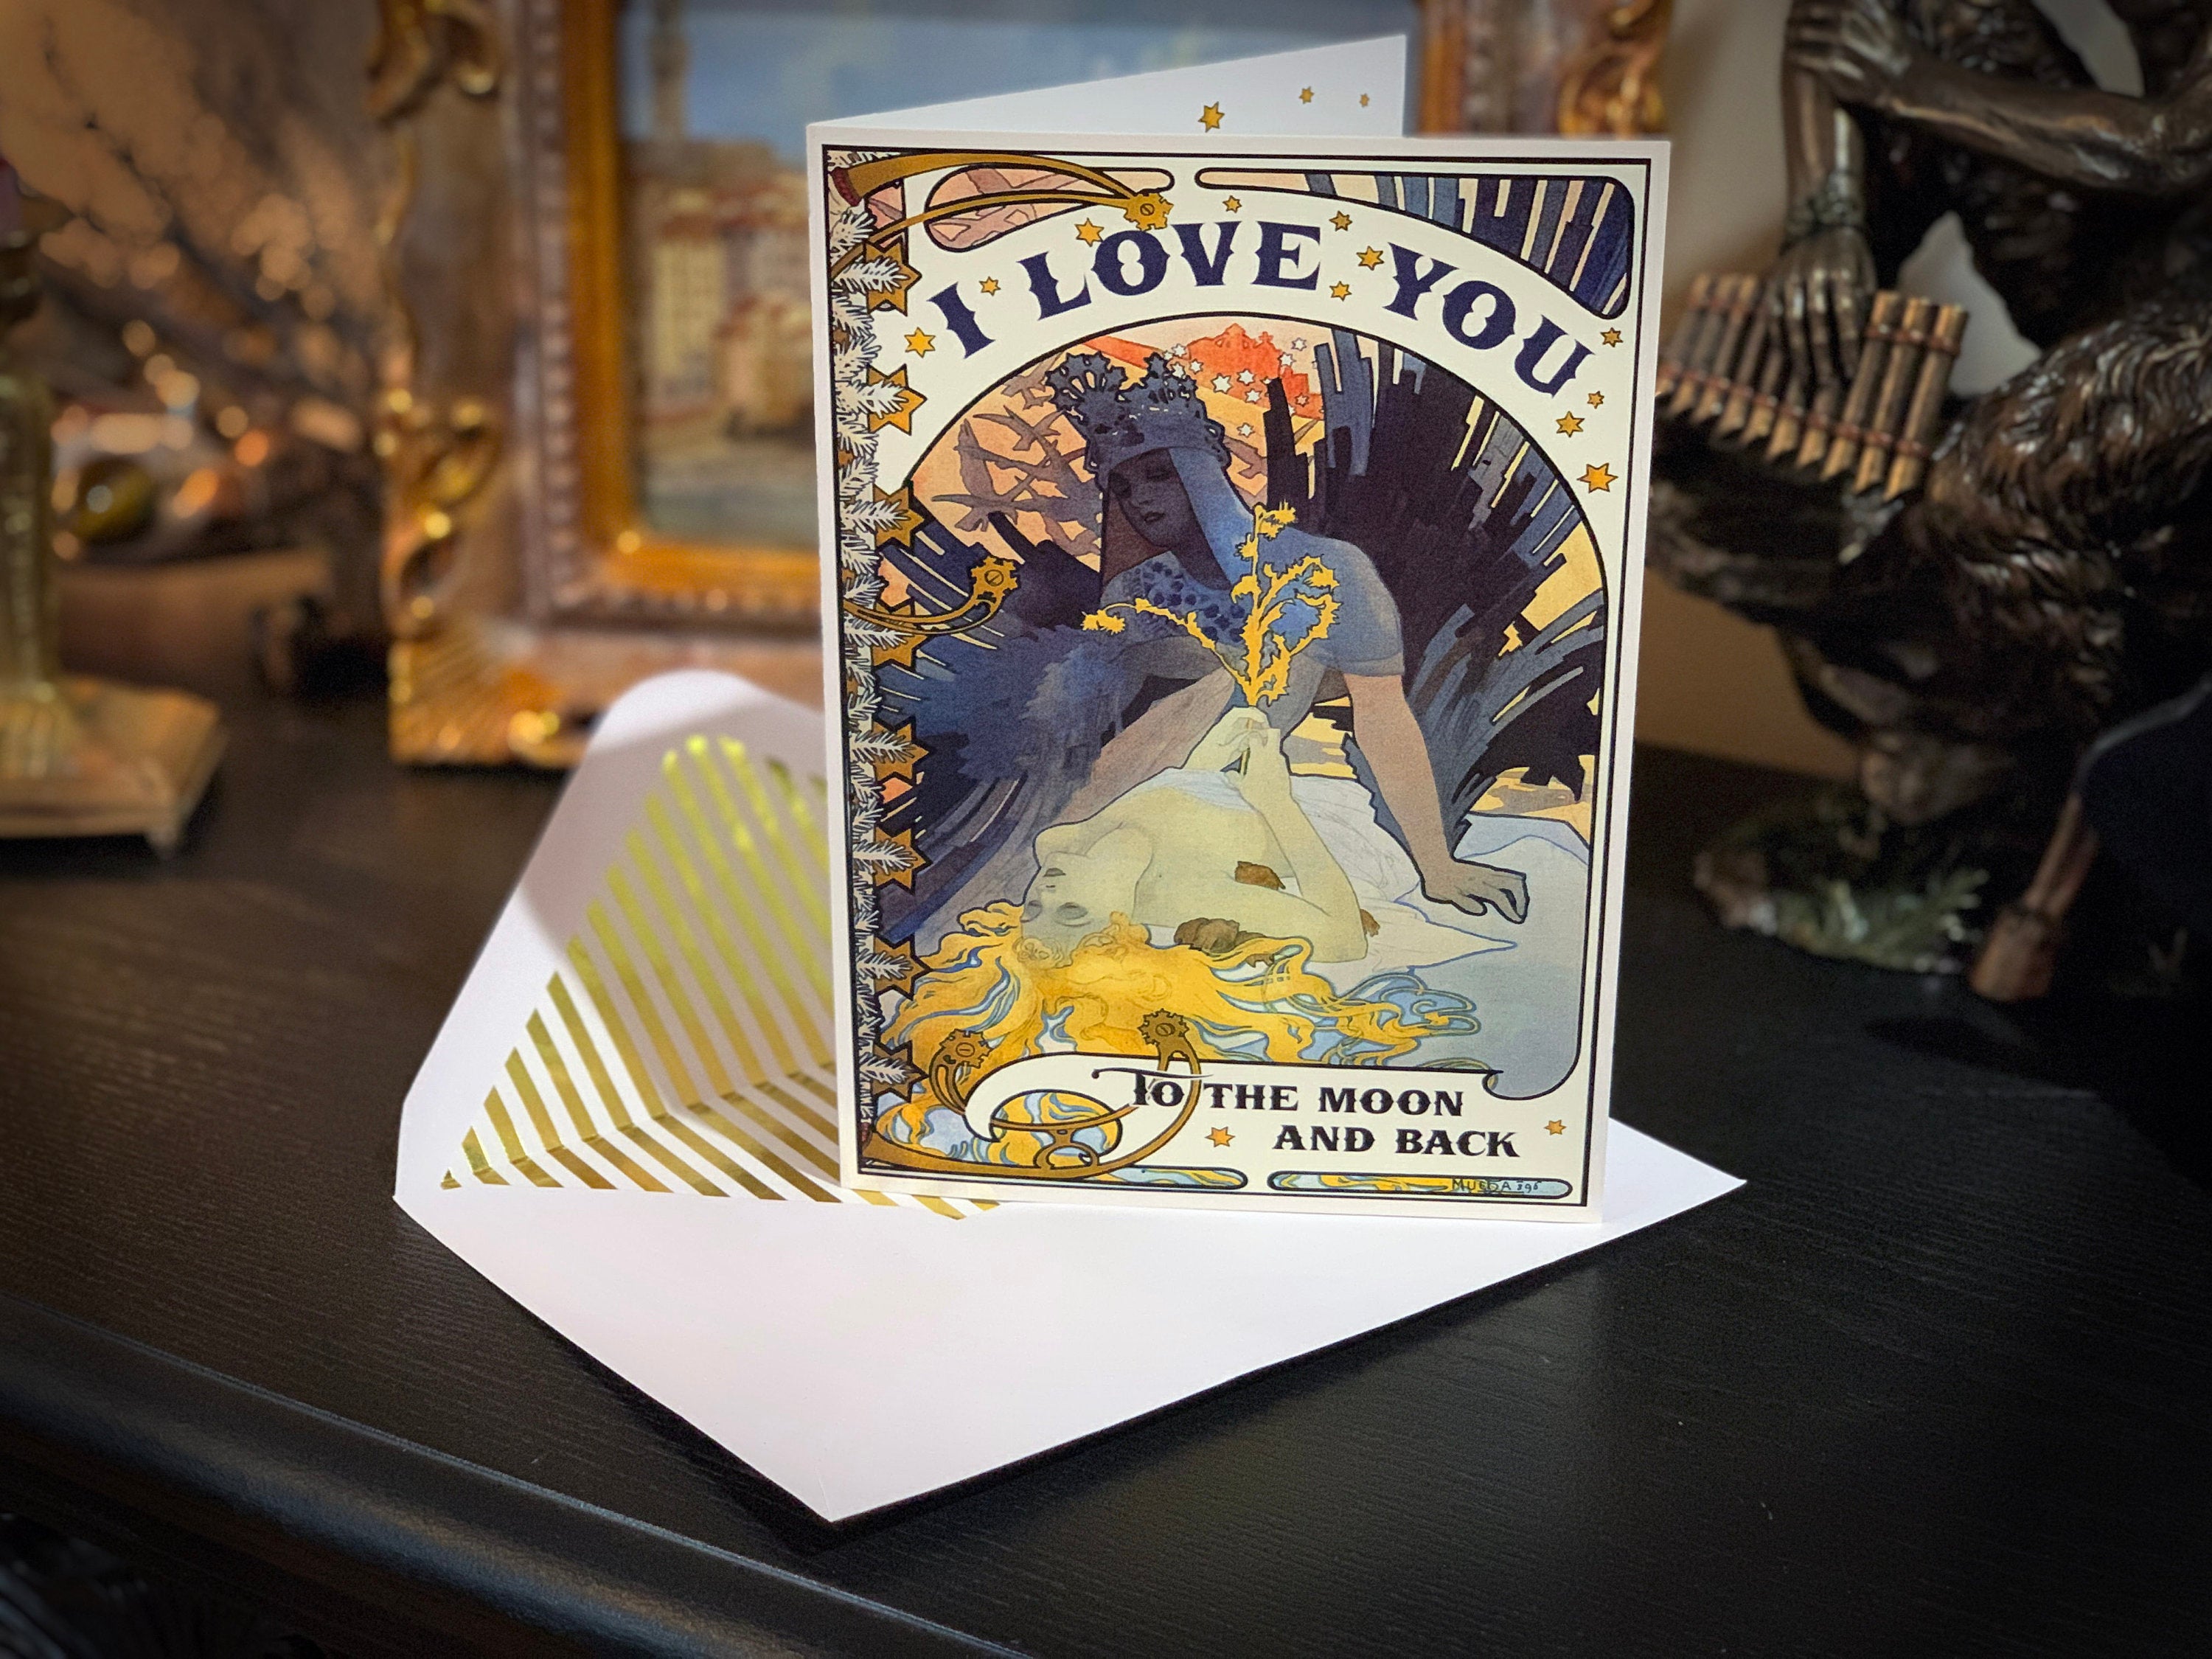 I Love You to the Moon and Back, Celestial Goddesses, Lesbian Valentine's Day Greeting Card with Gold Foil Envelope, 1 Card/Envelope